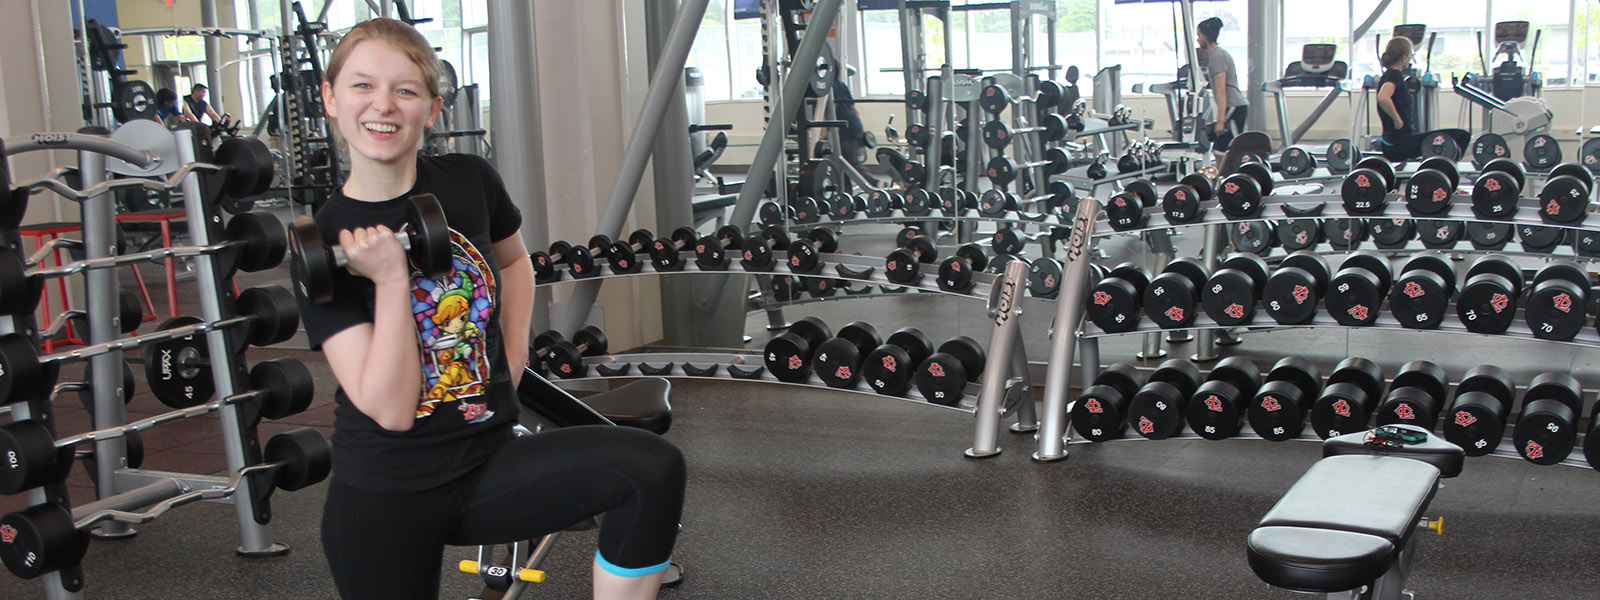 Image of student holding free weights in gym